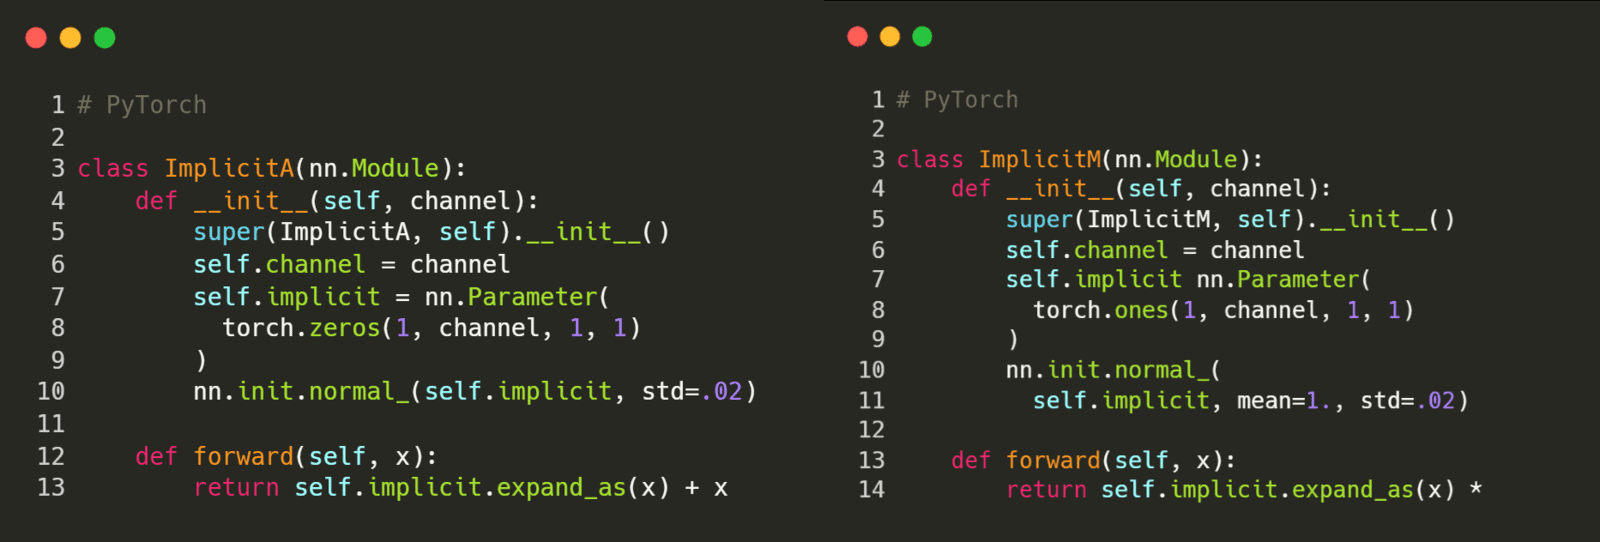 YoloR code in PyTorch for modeling implicit vector representation in .